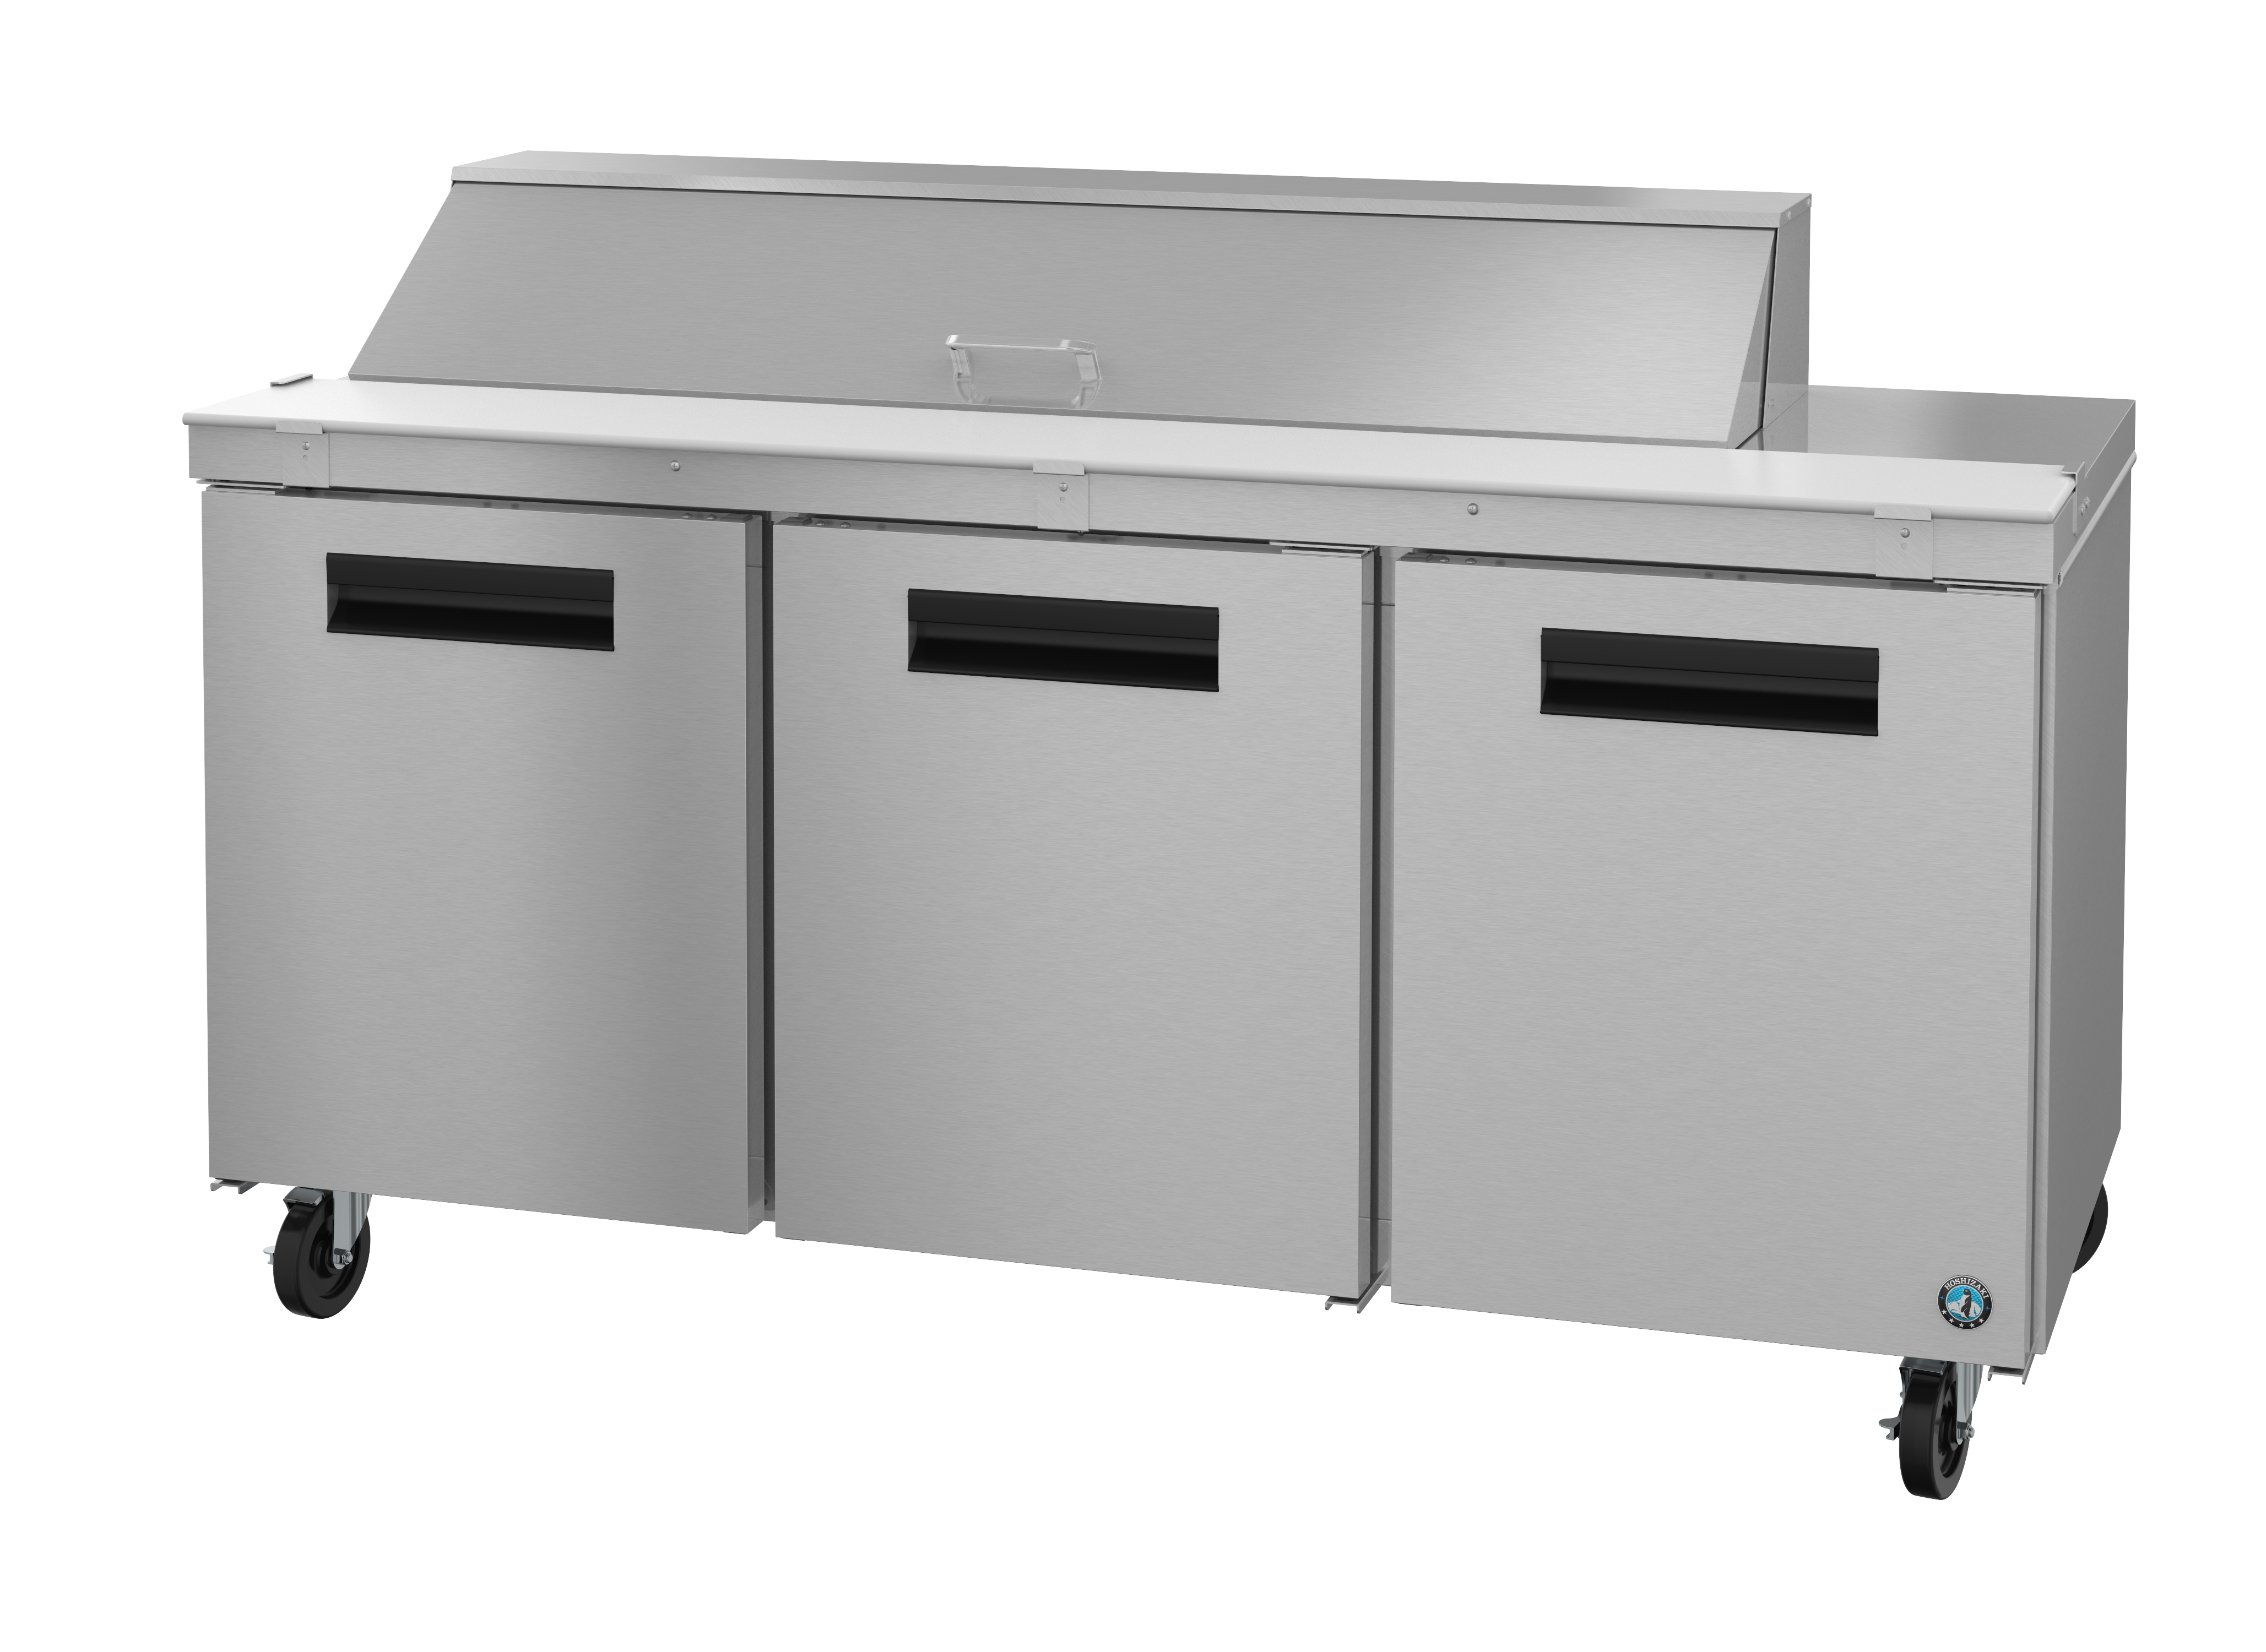 CRMR72-16, Refrigerator, Three Section Sandwich Prep Table, Stainless Doors